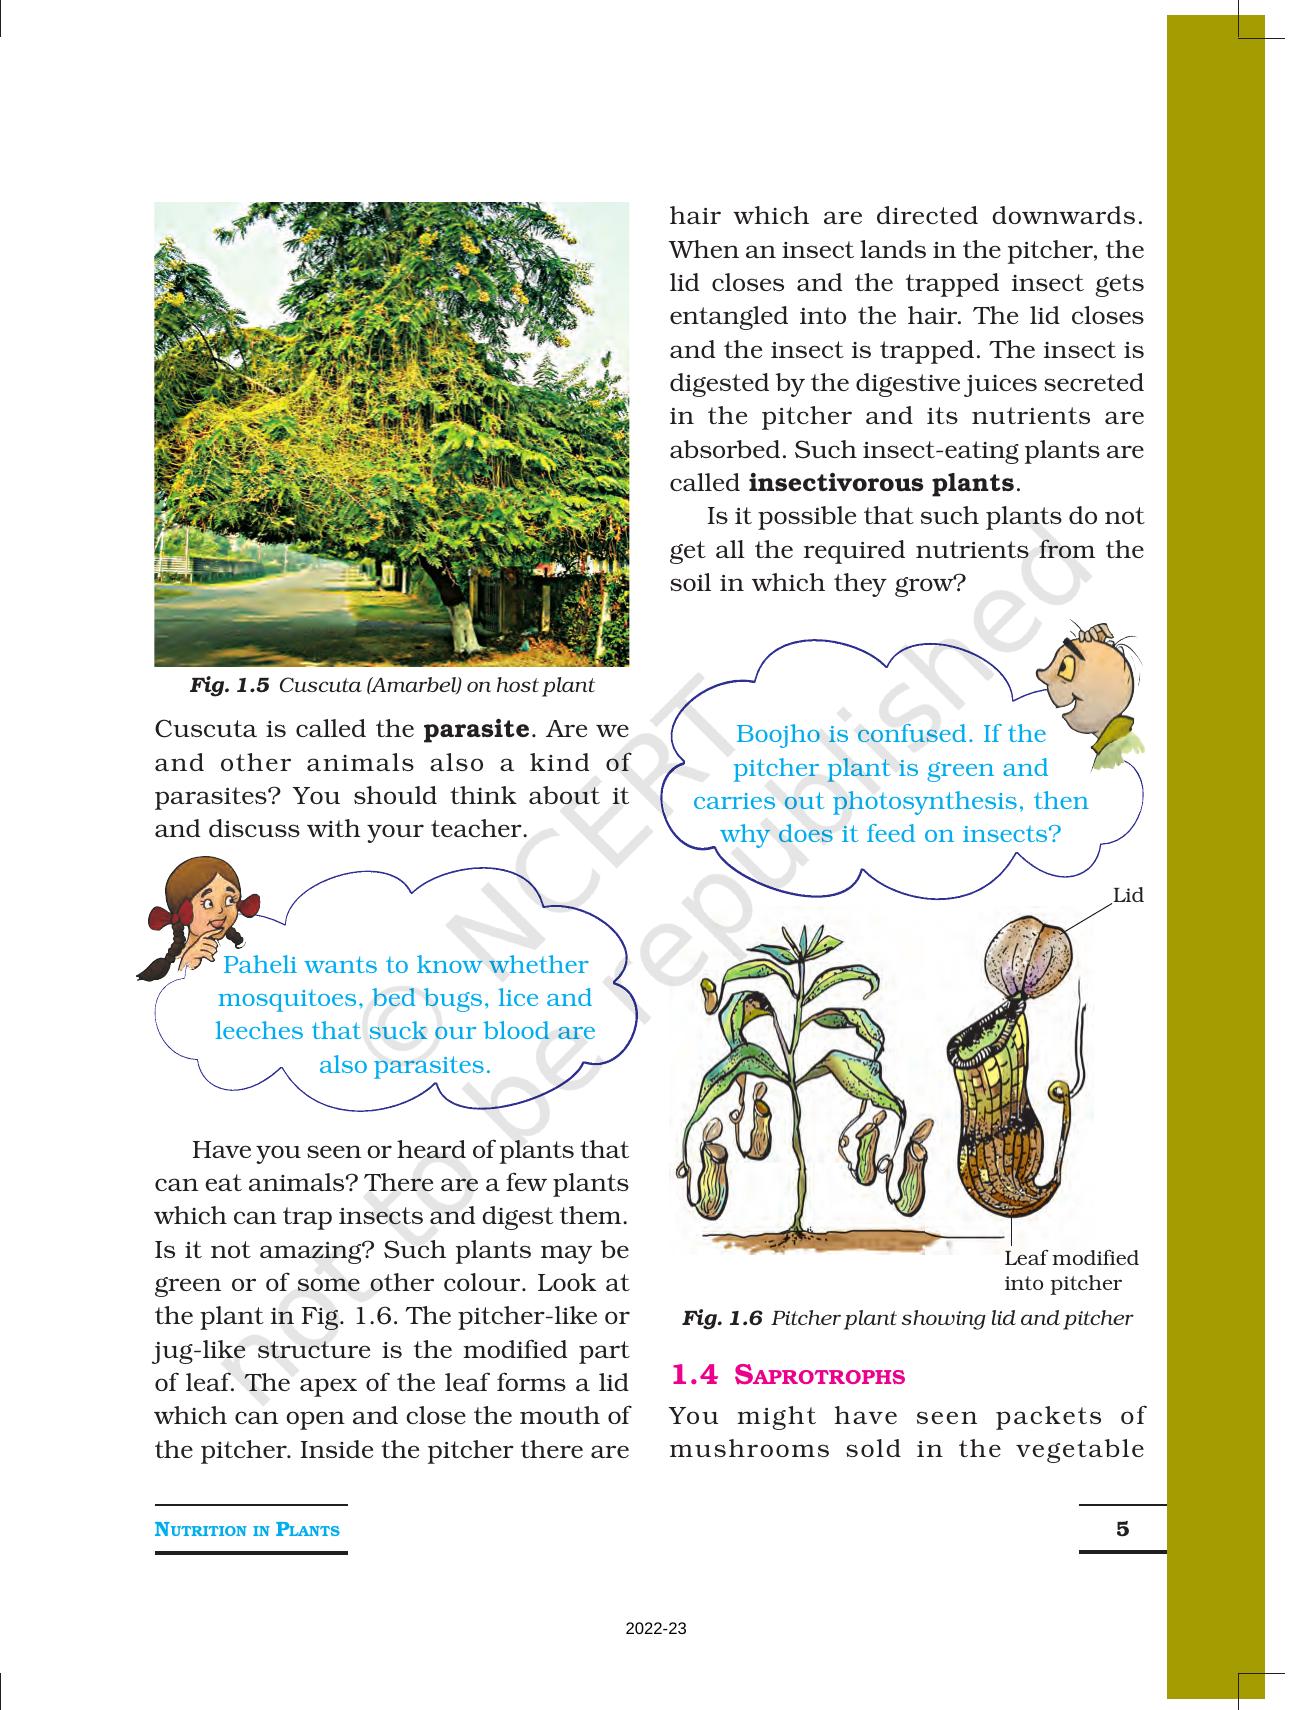 NCERT Book for Class 7 Science: Chapter 1-Nutrition in Plants - Page 5